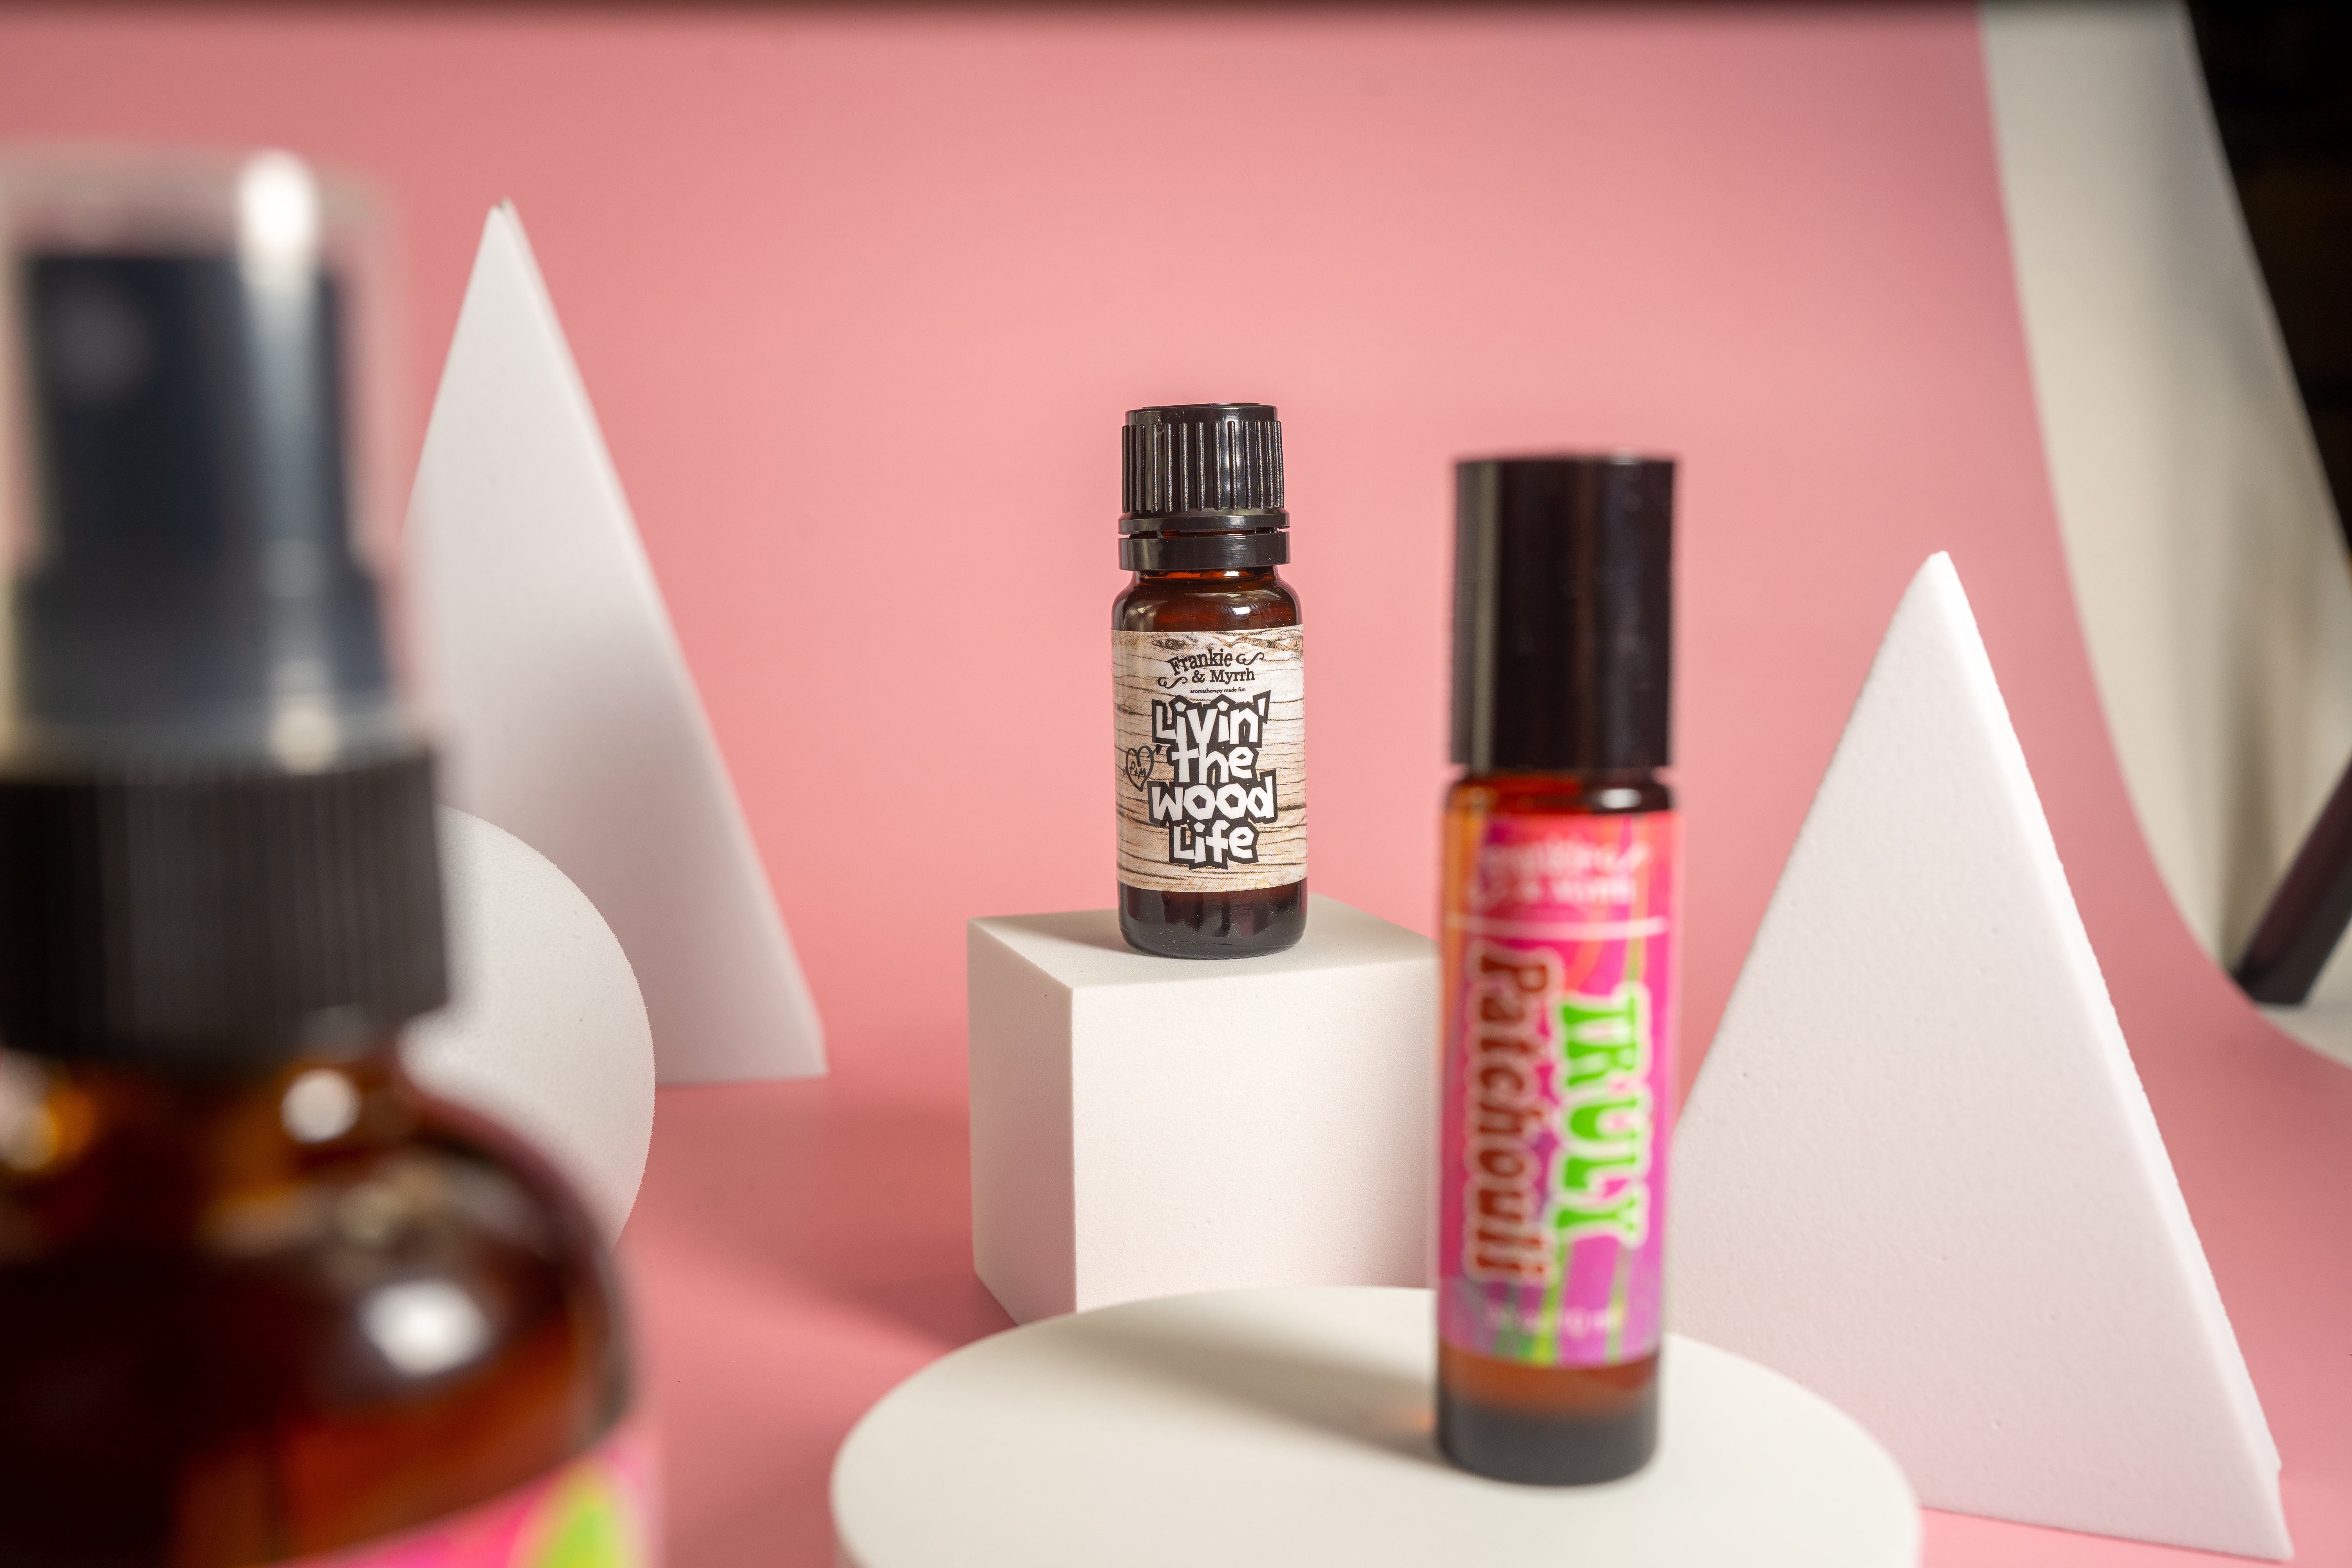 Patchouli Lovers' Mix n' Match Bundle | Patchouli Spray, Roll-on and Oil